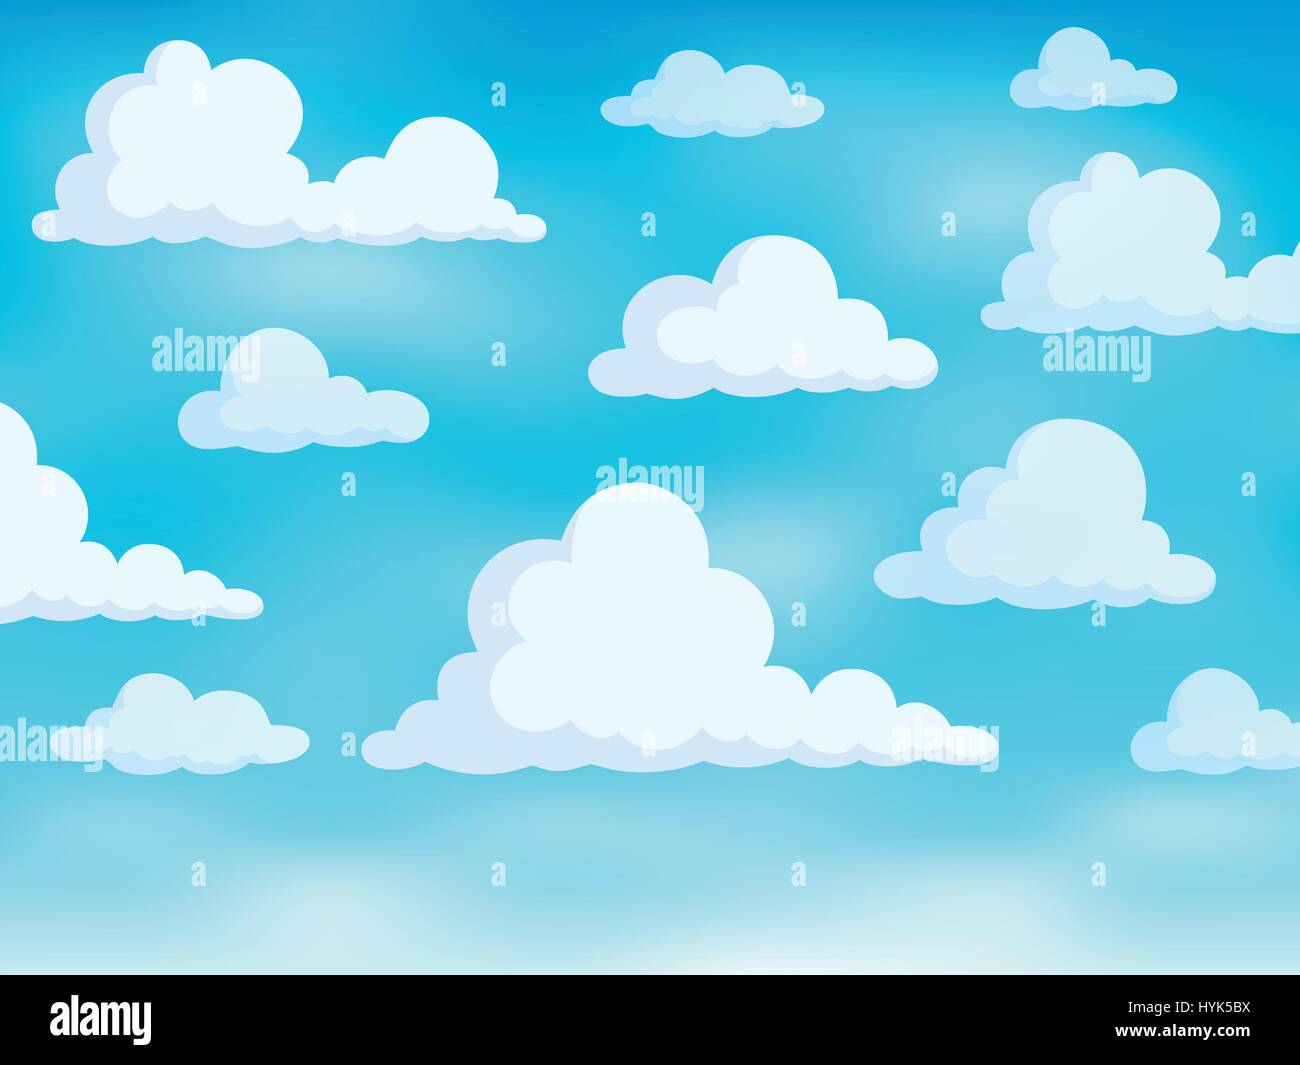 Clouds on sky theme 3 - eps10 vector illustration. Stock Vector